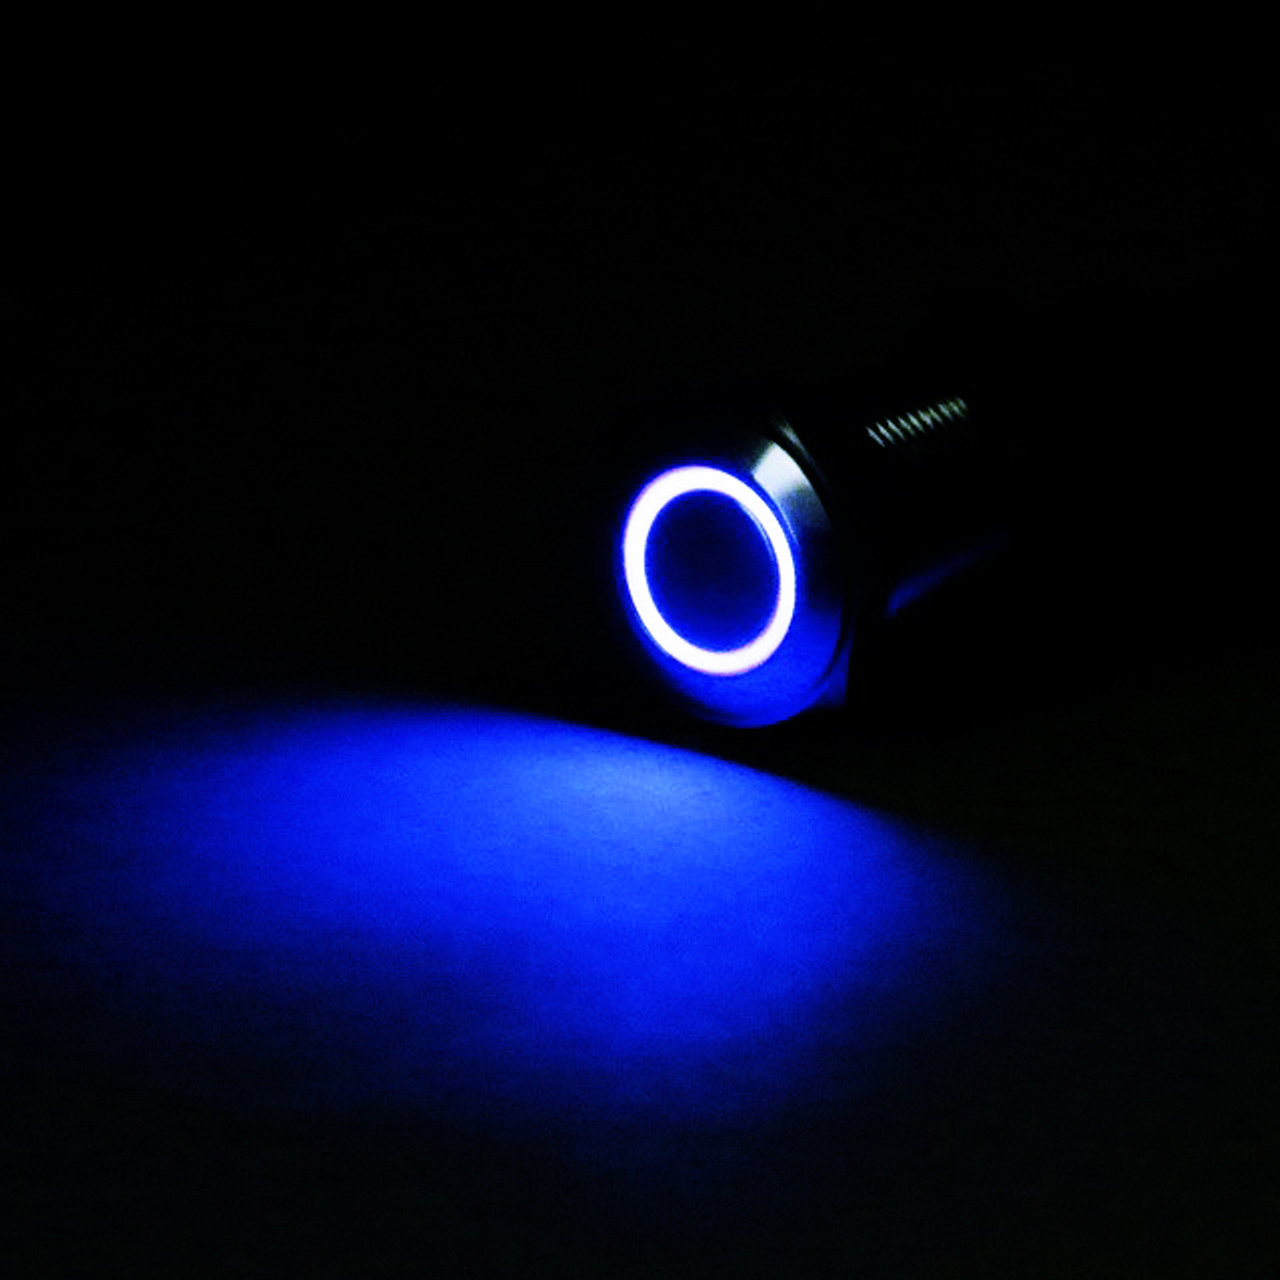 Silver Metal Stainless Steel Blue LED Illuminated Latching Pushbutton Swit T3Z5